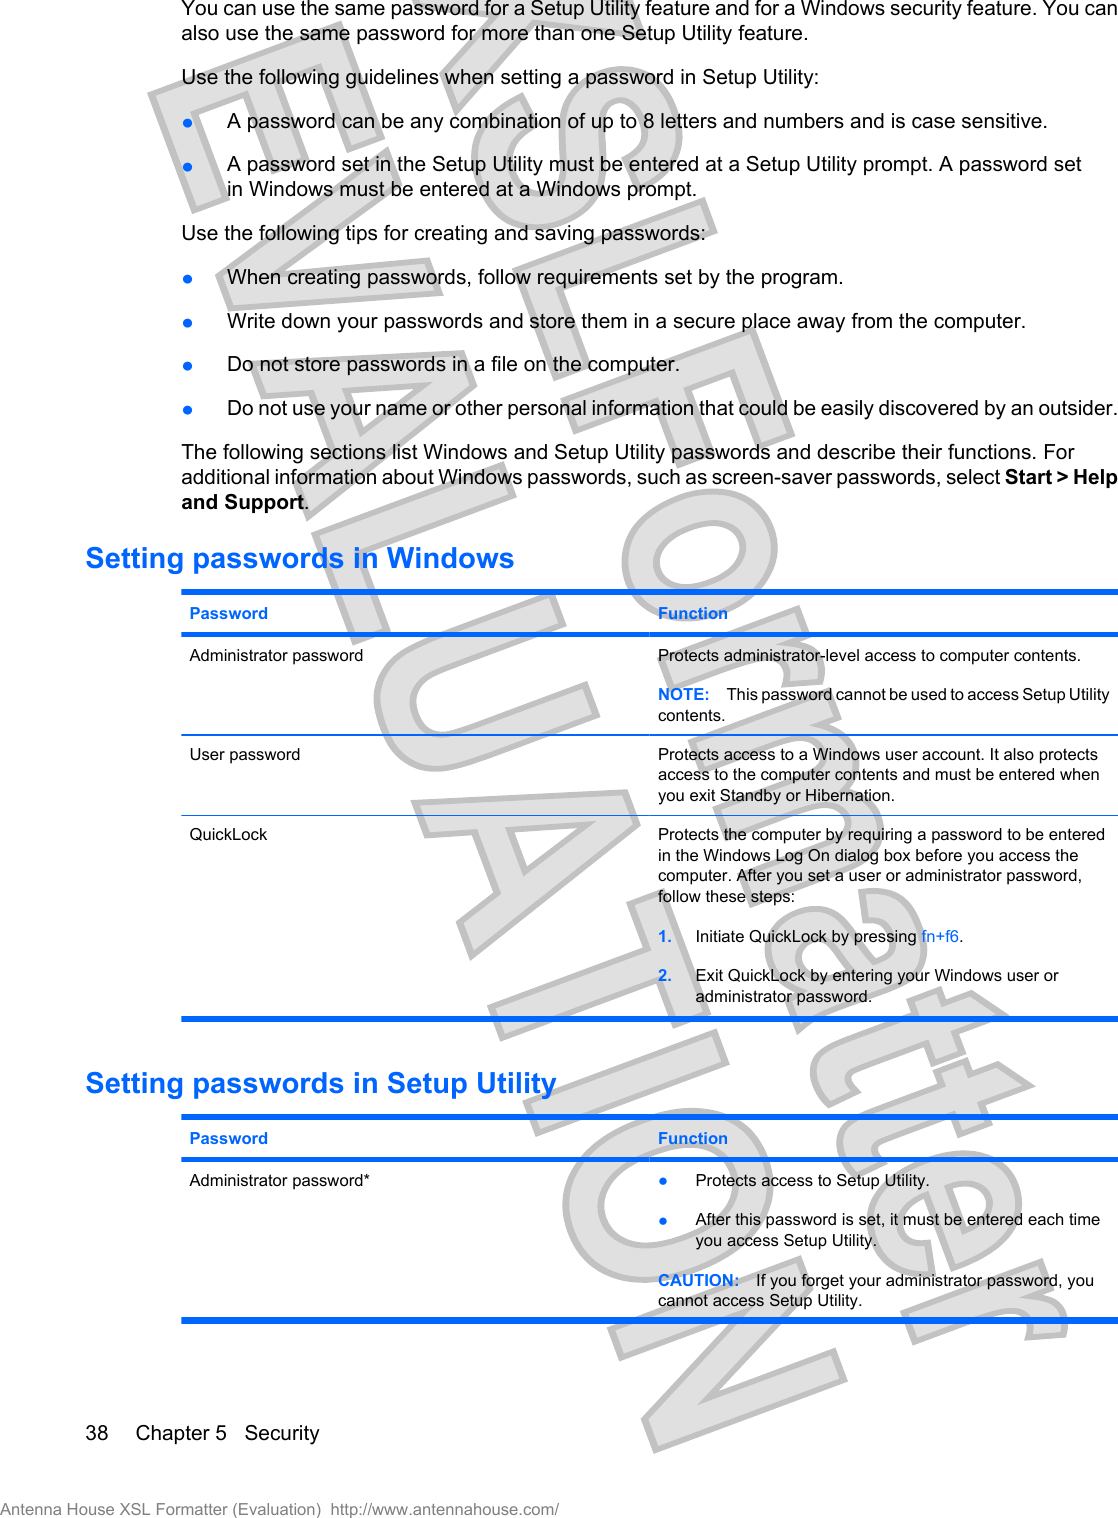 You can use the same password for a Setup Utility feature and for a Windows security feature. You canalso use the same password for more than one Setup Utility feature.Use the following guidelines when setting a password in Setup Utility:łA password can be any combination of up to 8 letters and numbers and is case sensitive.łA password set in the Setup Utility must be entered at a Setup Utility prompt. A password setin Windows must be entered at a Windows prompt.Use the following tips for creating and saving passwords:łWhen creating passwords, follow requirements set by the program.łWrite down your passwords and store them in a secure place away from the computer.łDo not store passwords in a file on the computer.łDo not use your name or other personal information that could be easily discovered by an outsider.The following sections list Windows and Setup Utility passwords and describe their functions. Foradditional information about Windows passwords, such as screen-saver passwords, select Start &gt; Helpand Support.Setting passwords in WindowsPassword FunctionAdministrator password Protects administrator-level access to computer contents.NOTE: This password cannot be used to access Setup Utilitycontents.User password Protects access to a Windows user account. It also protectsaccess to the computer contents and must be entered whenyou exit Standby or Hibernation.QuickLock Protects the computer by requiring a password to be enteredin the Windows Log On dialog box before you access thecomputer. After you set a user or administrator password,follow these steps:1. Initiate QuickLock by pressing fn+f6.2. Exit QuickLock by entering your Windows user oradministrator password.Setting passwords in Setup UtilityPassword FunctionAdministrator password* łProtects access to Setup Utility.łAfter this password is set, it must be entered each timeyou access Setup Utility.CAUTION: If you forget your administrator password, youcannot access Setup Utility.38 Chapter 5   SecurityAntenna House XSL Formatter (Evaluation)  http://www.antennahouse.com/